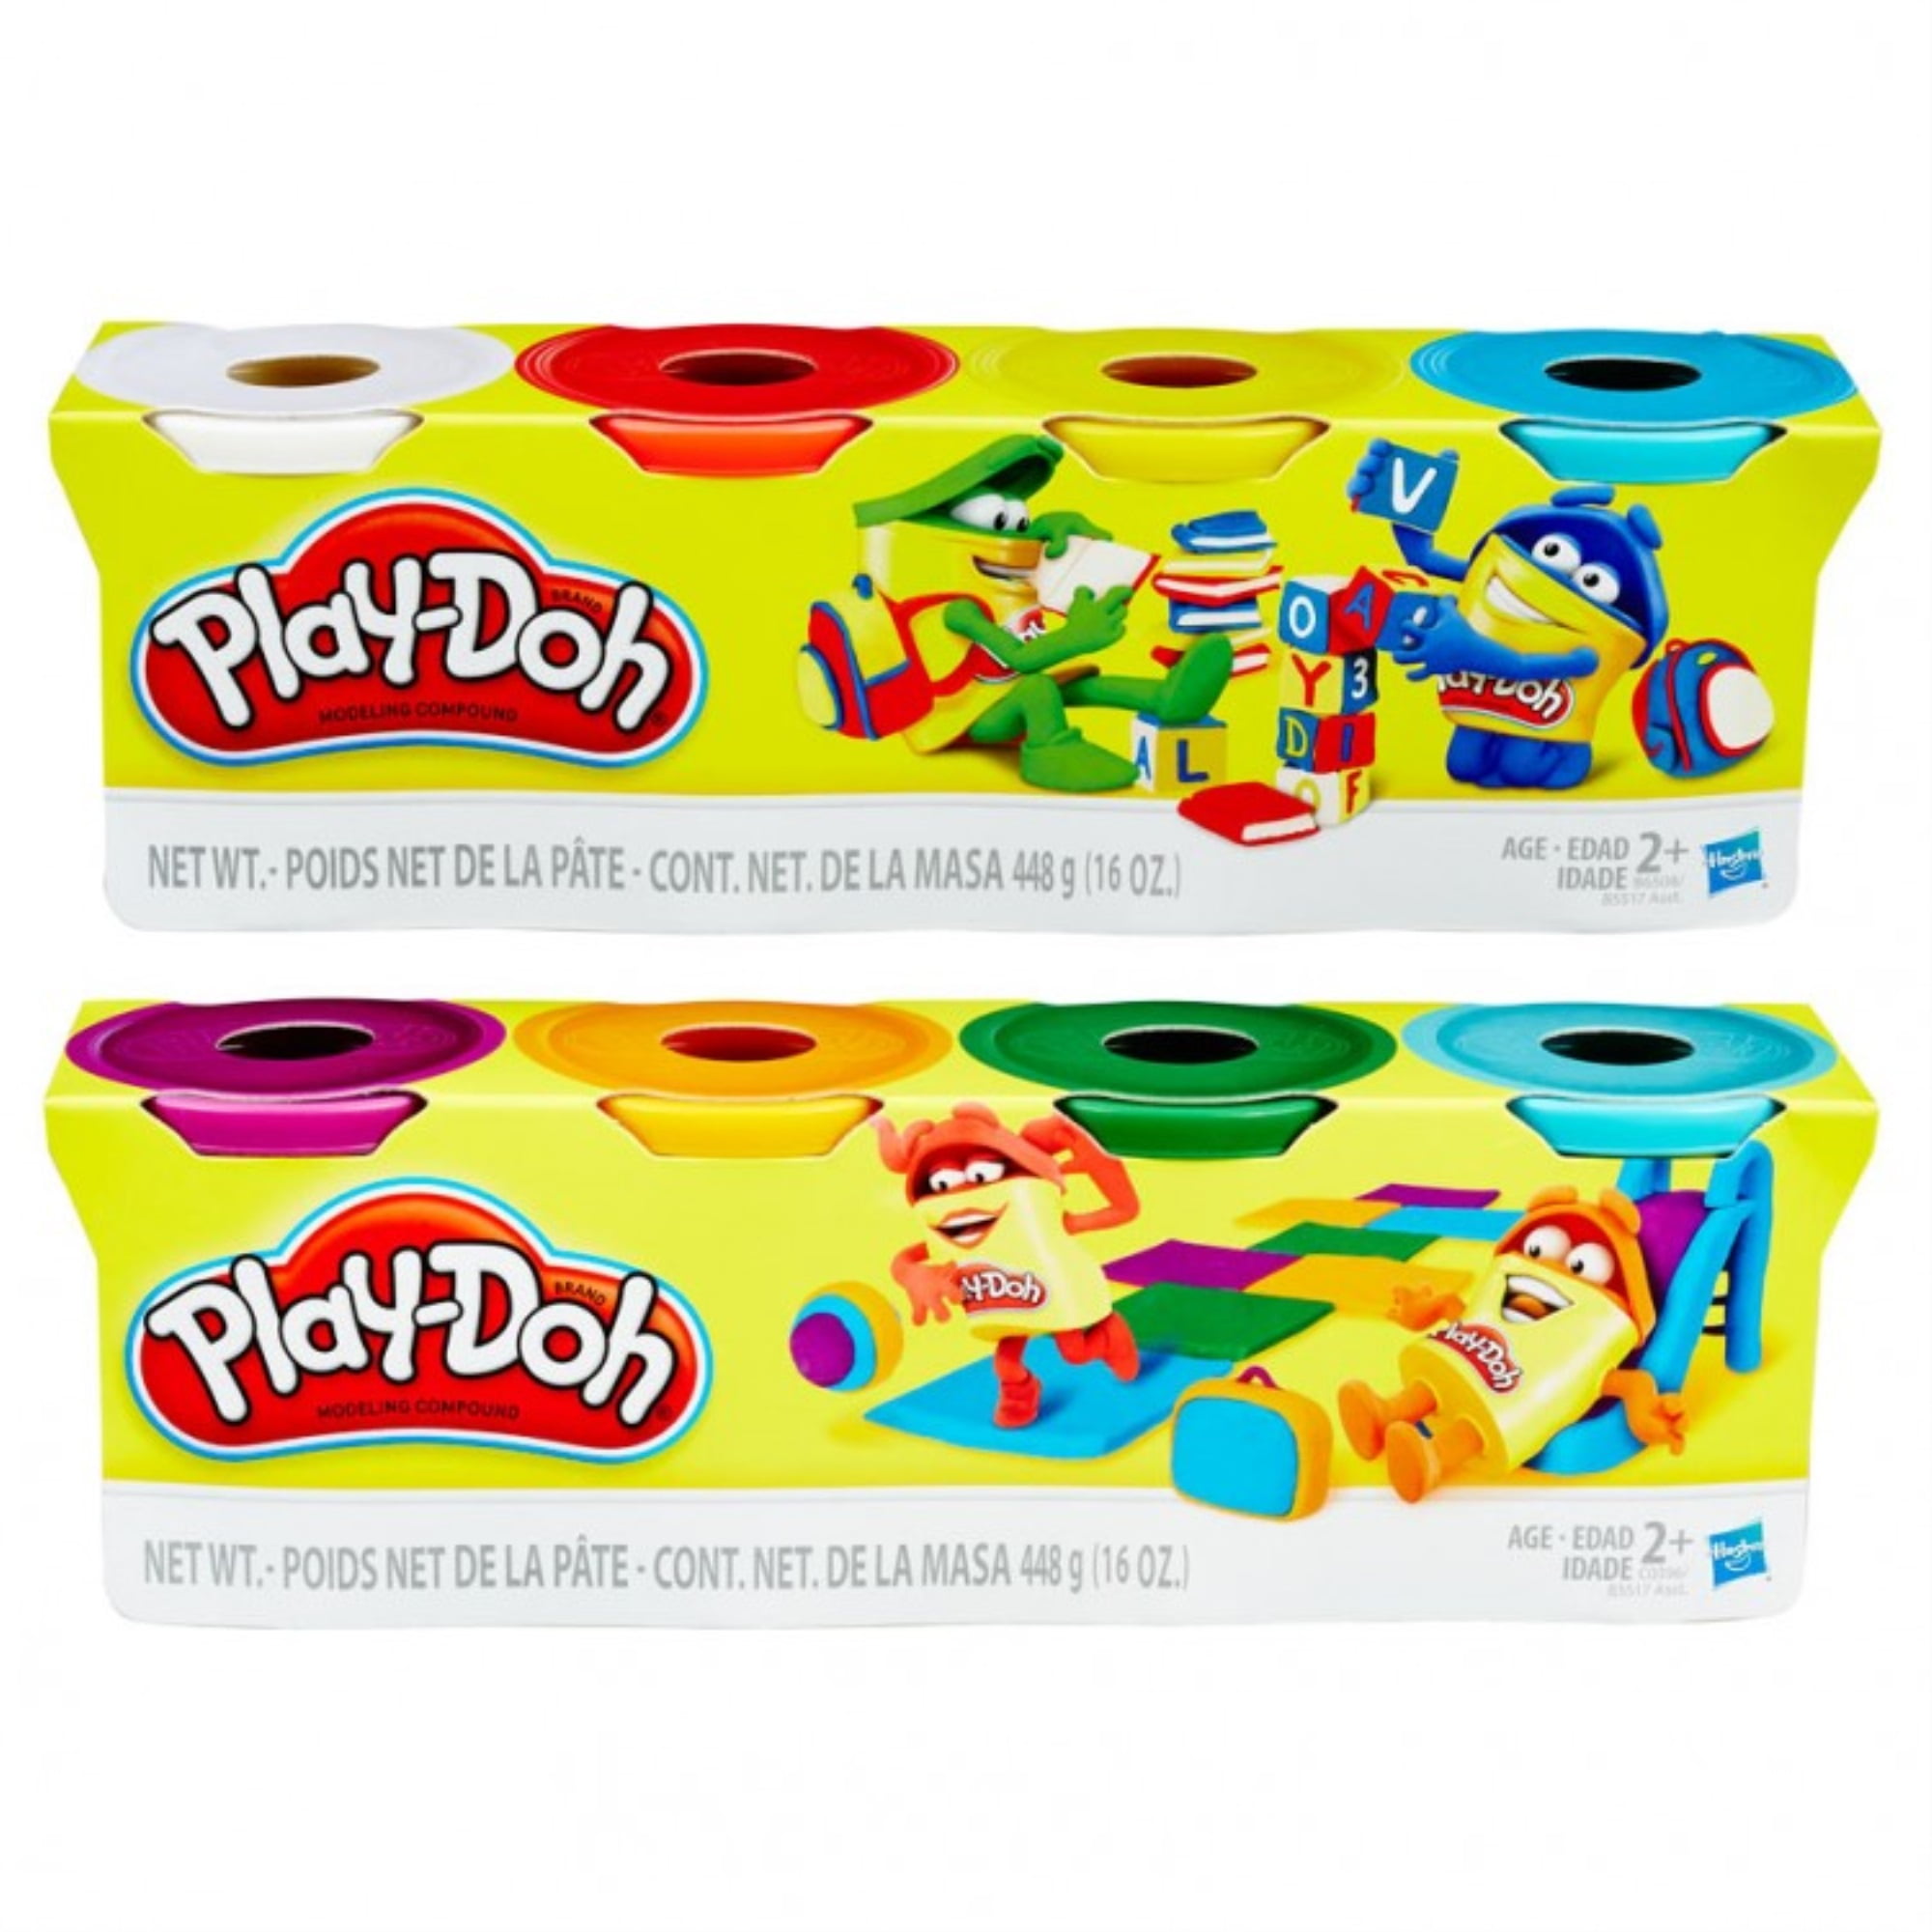 Play-Doh HASB5517BAMZ 4-Pack of Colors Gift Set Bundle 8 Cans-32 Oz 